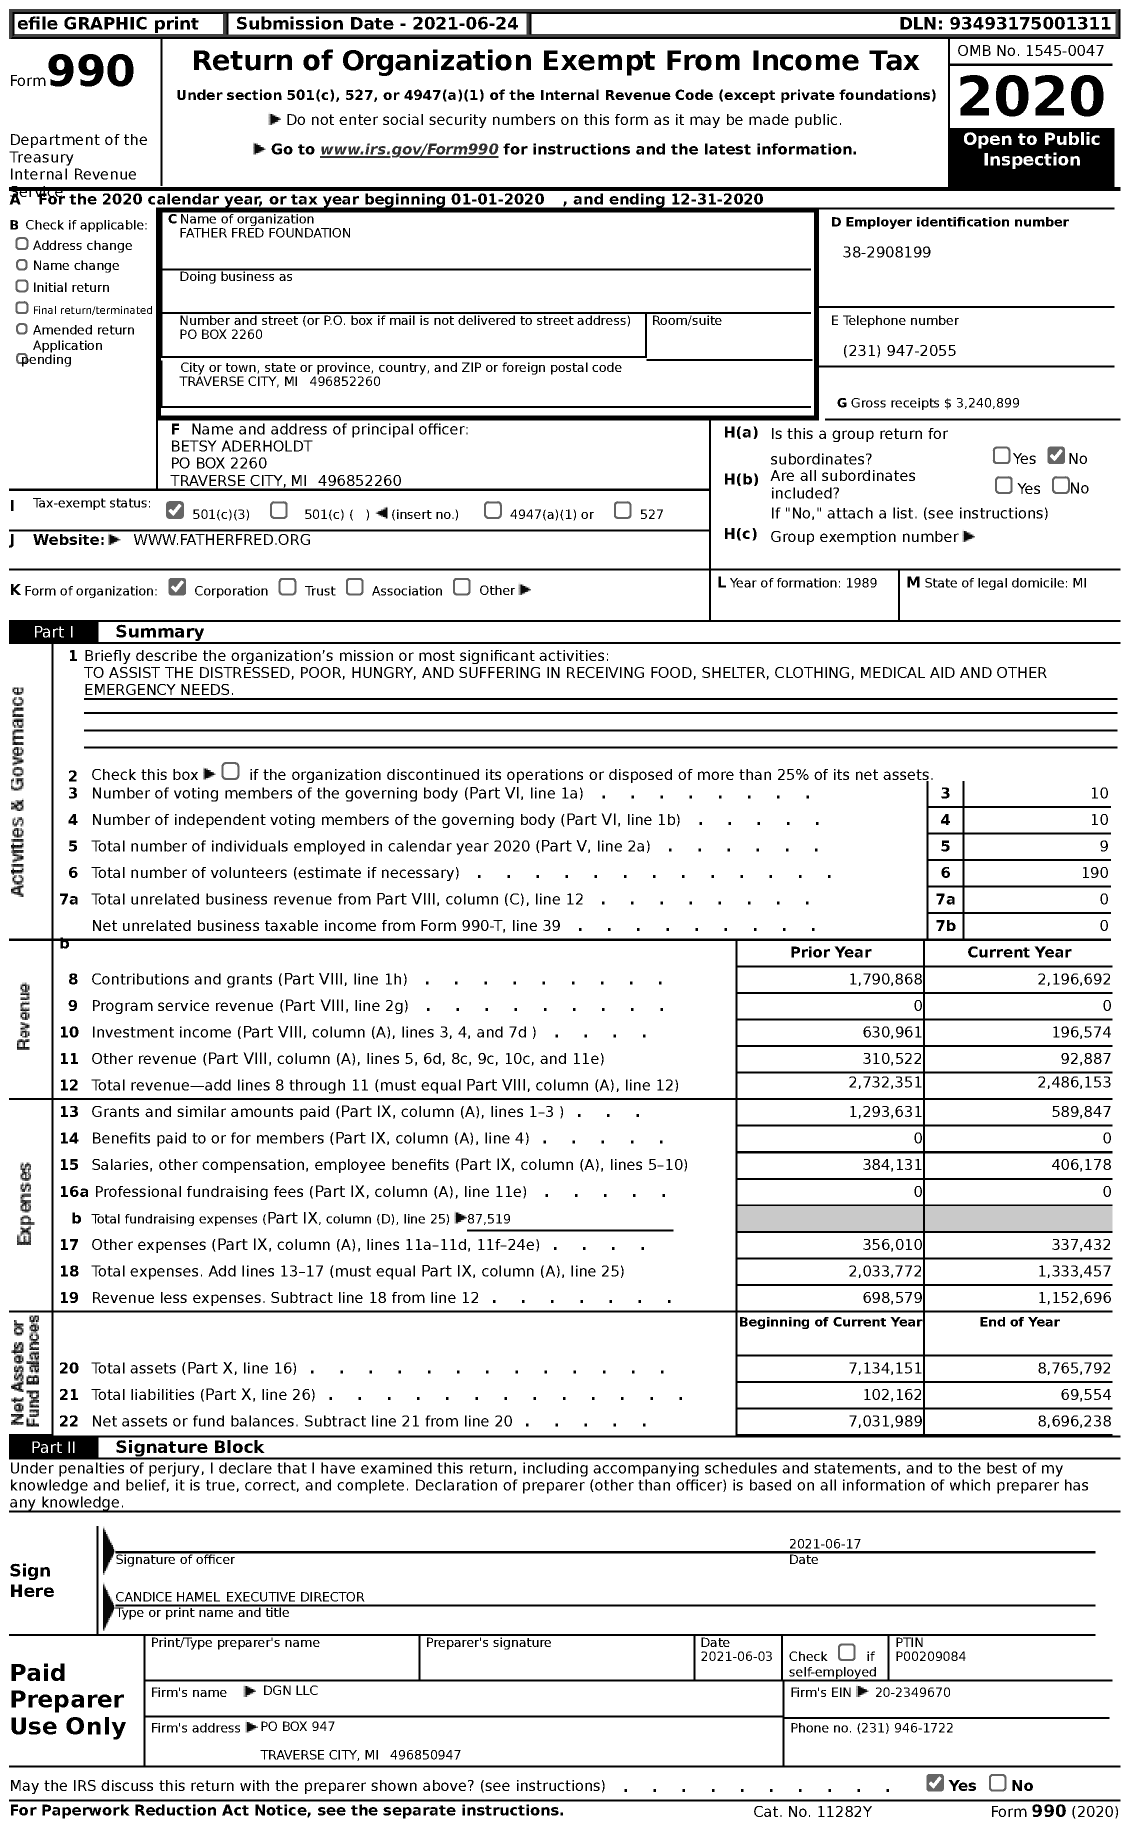 Image of first page of 2020 Form 990 for Father Fred Foundation